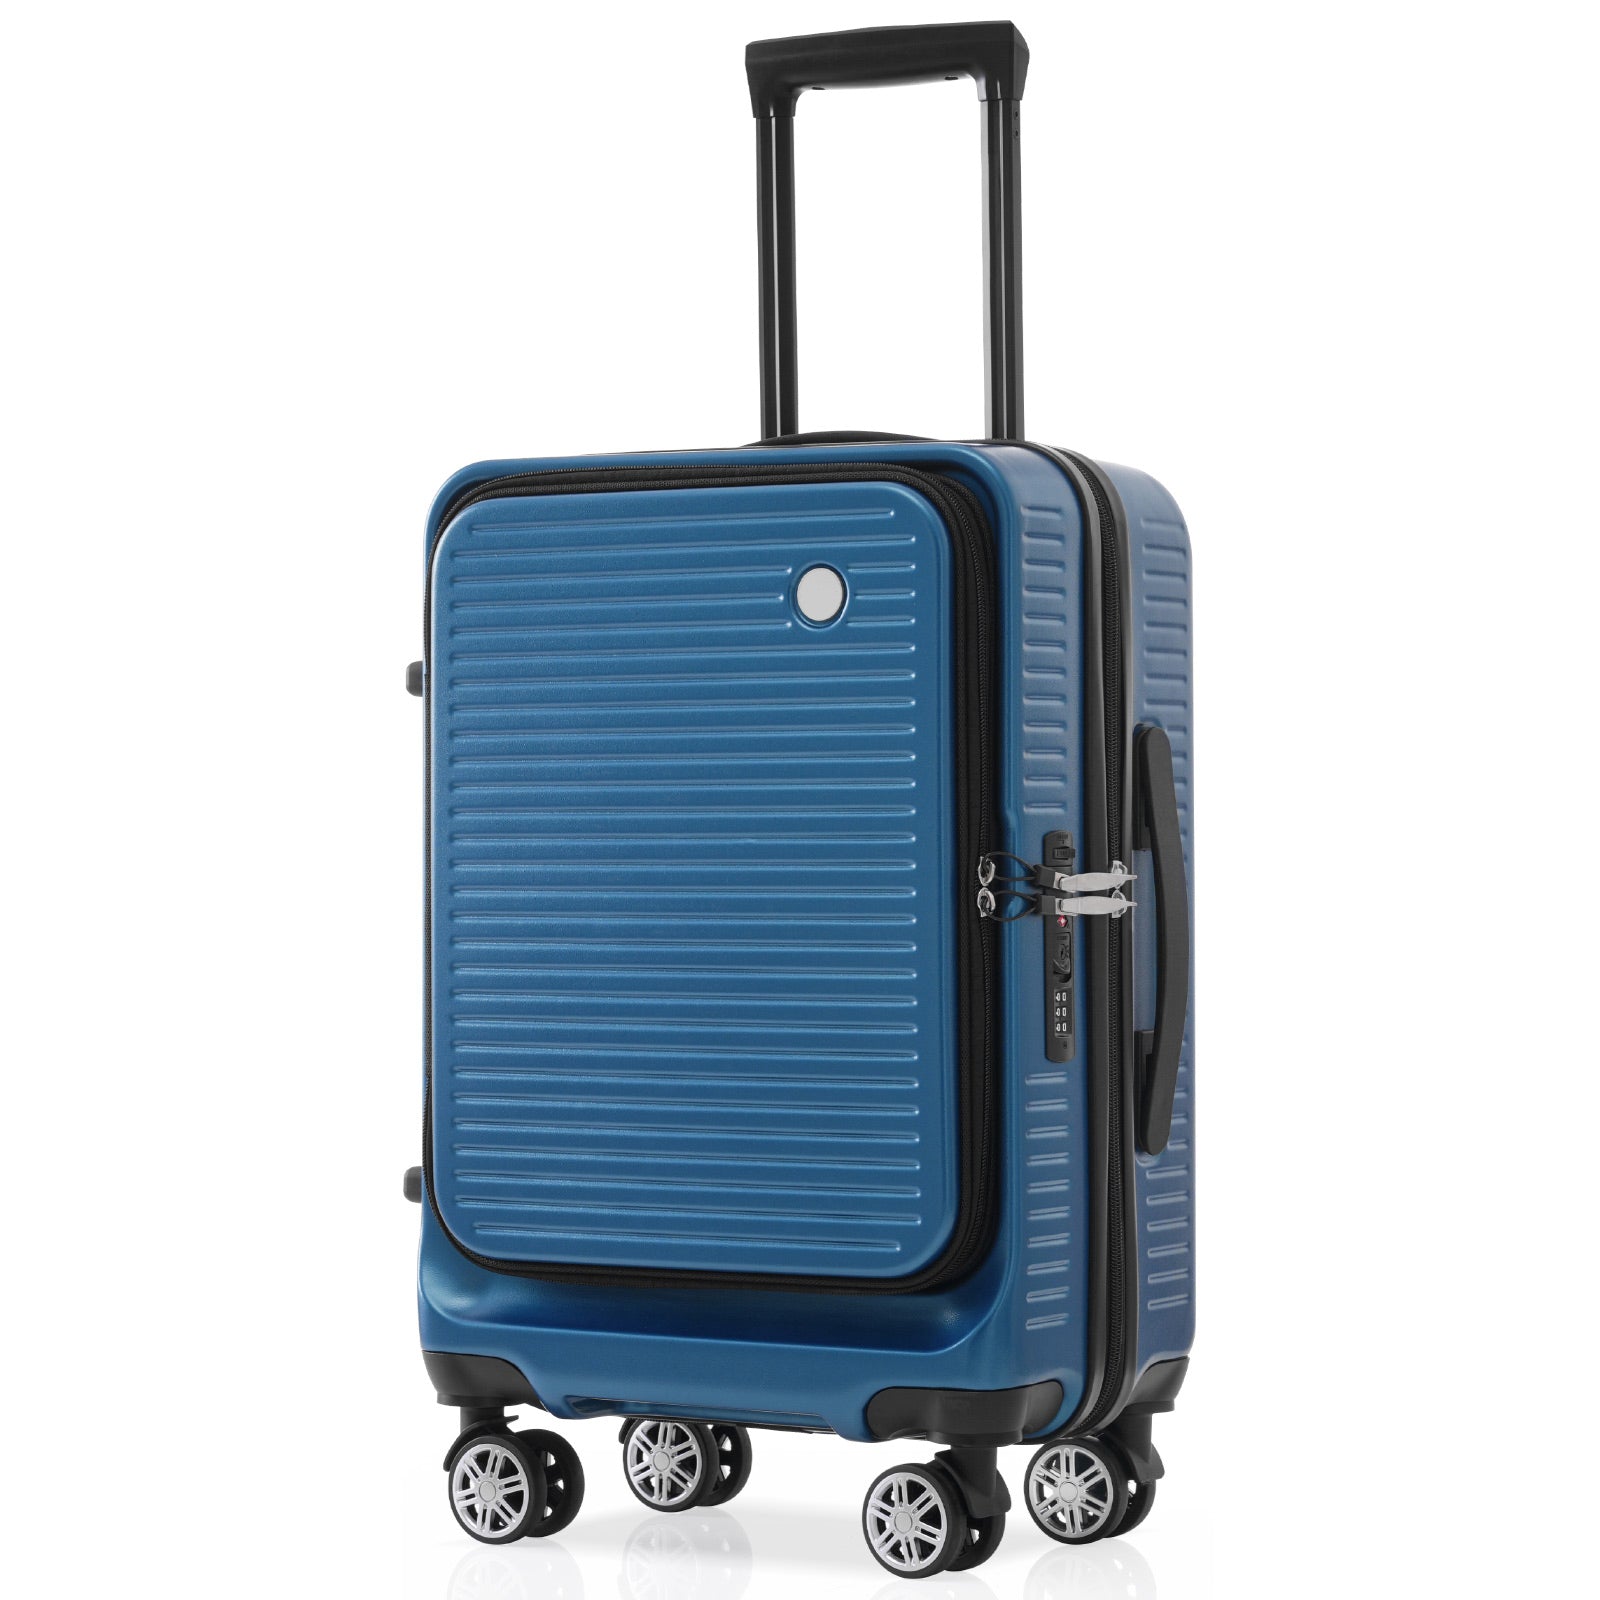 Carry on Luggage 20 Inch Front Open Luggage peacock blue-abs